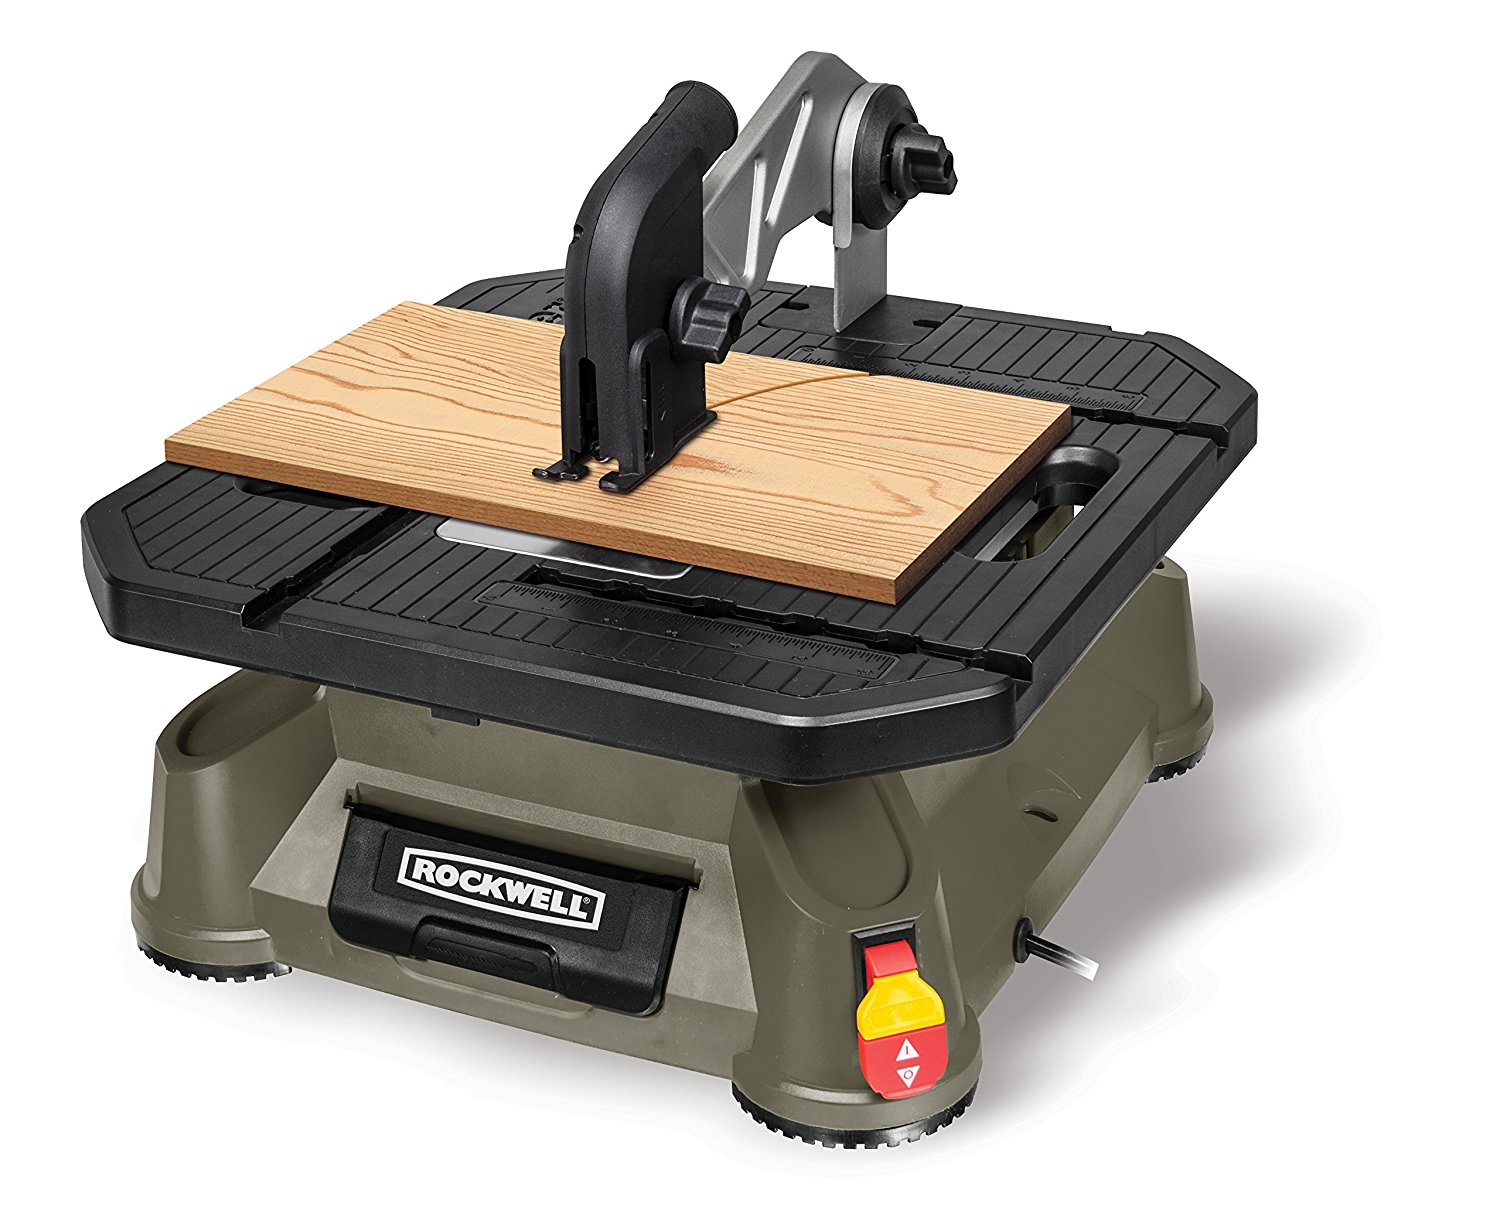 Rockwell BladeRunner X2 Portable Tabletop Saw with Steel Rip Fence, Miter Gauge, and 7 Accessories – RK7323 - Mini Table Saws